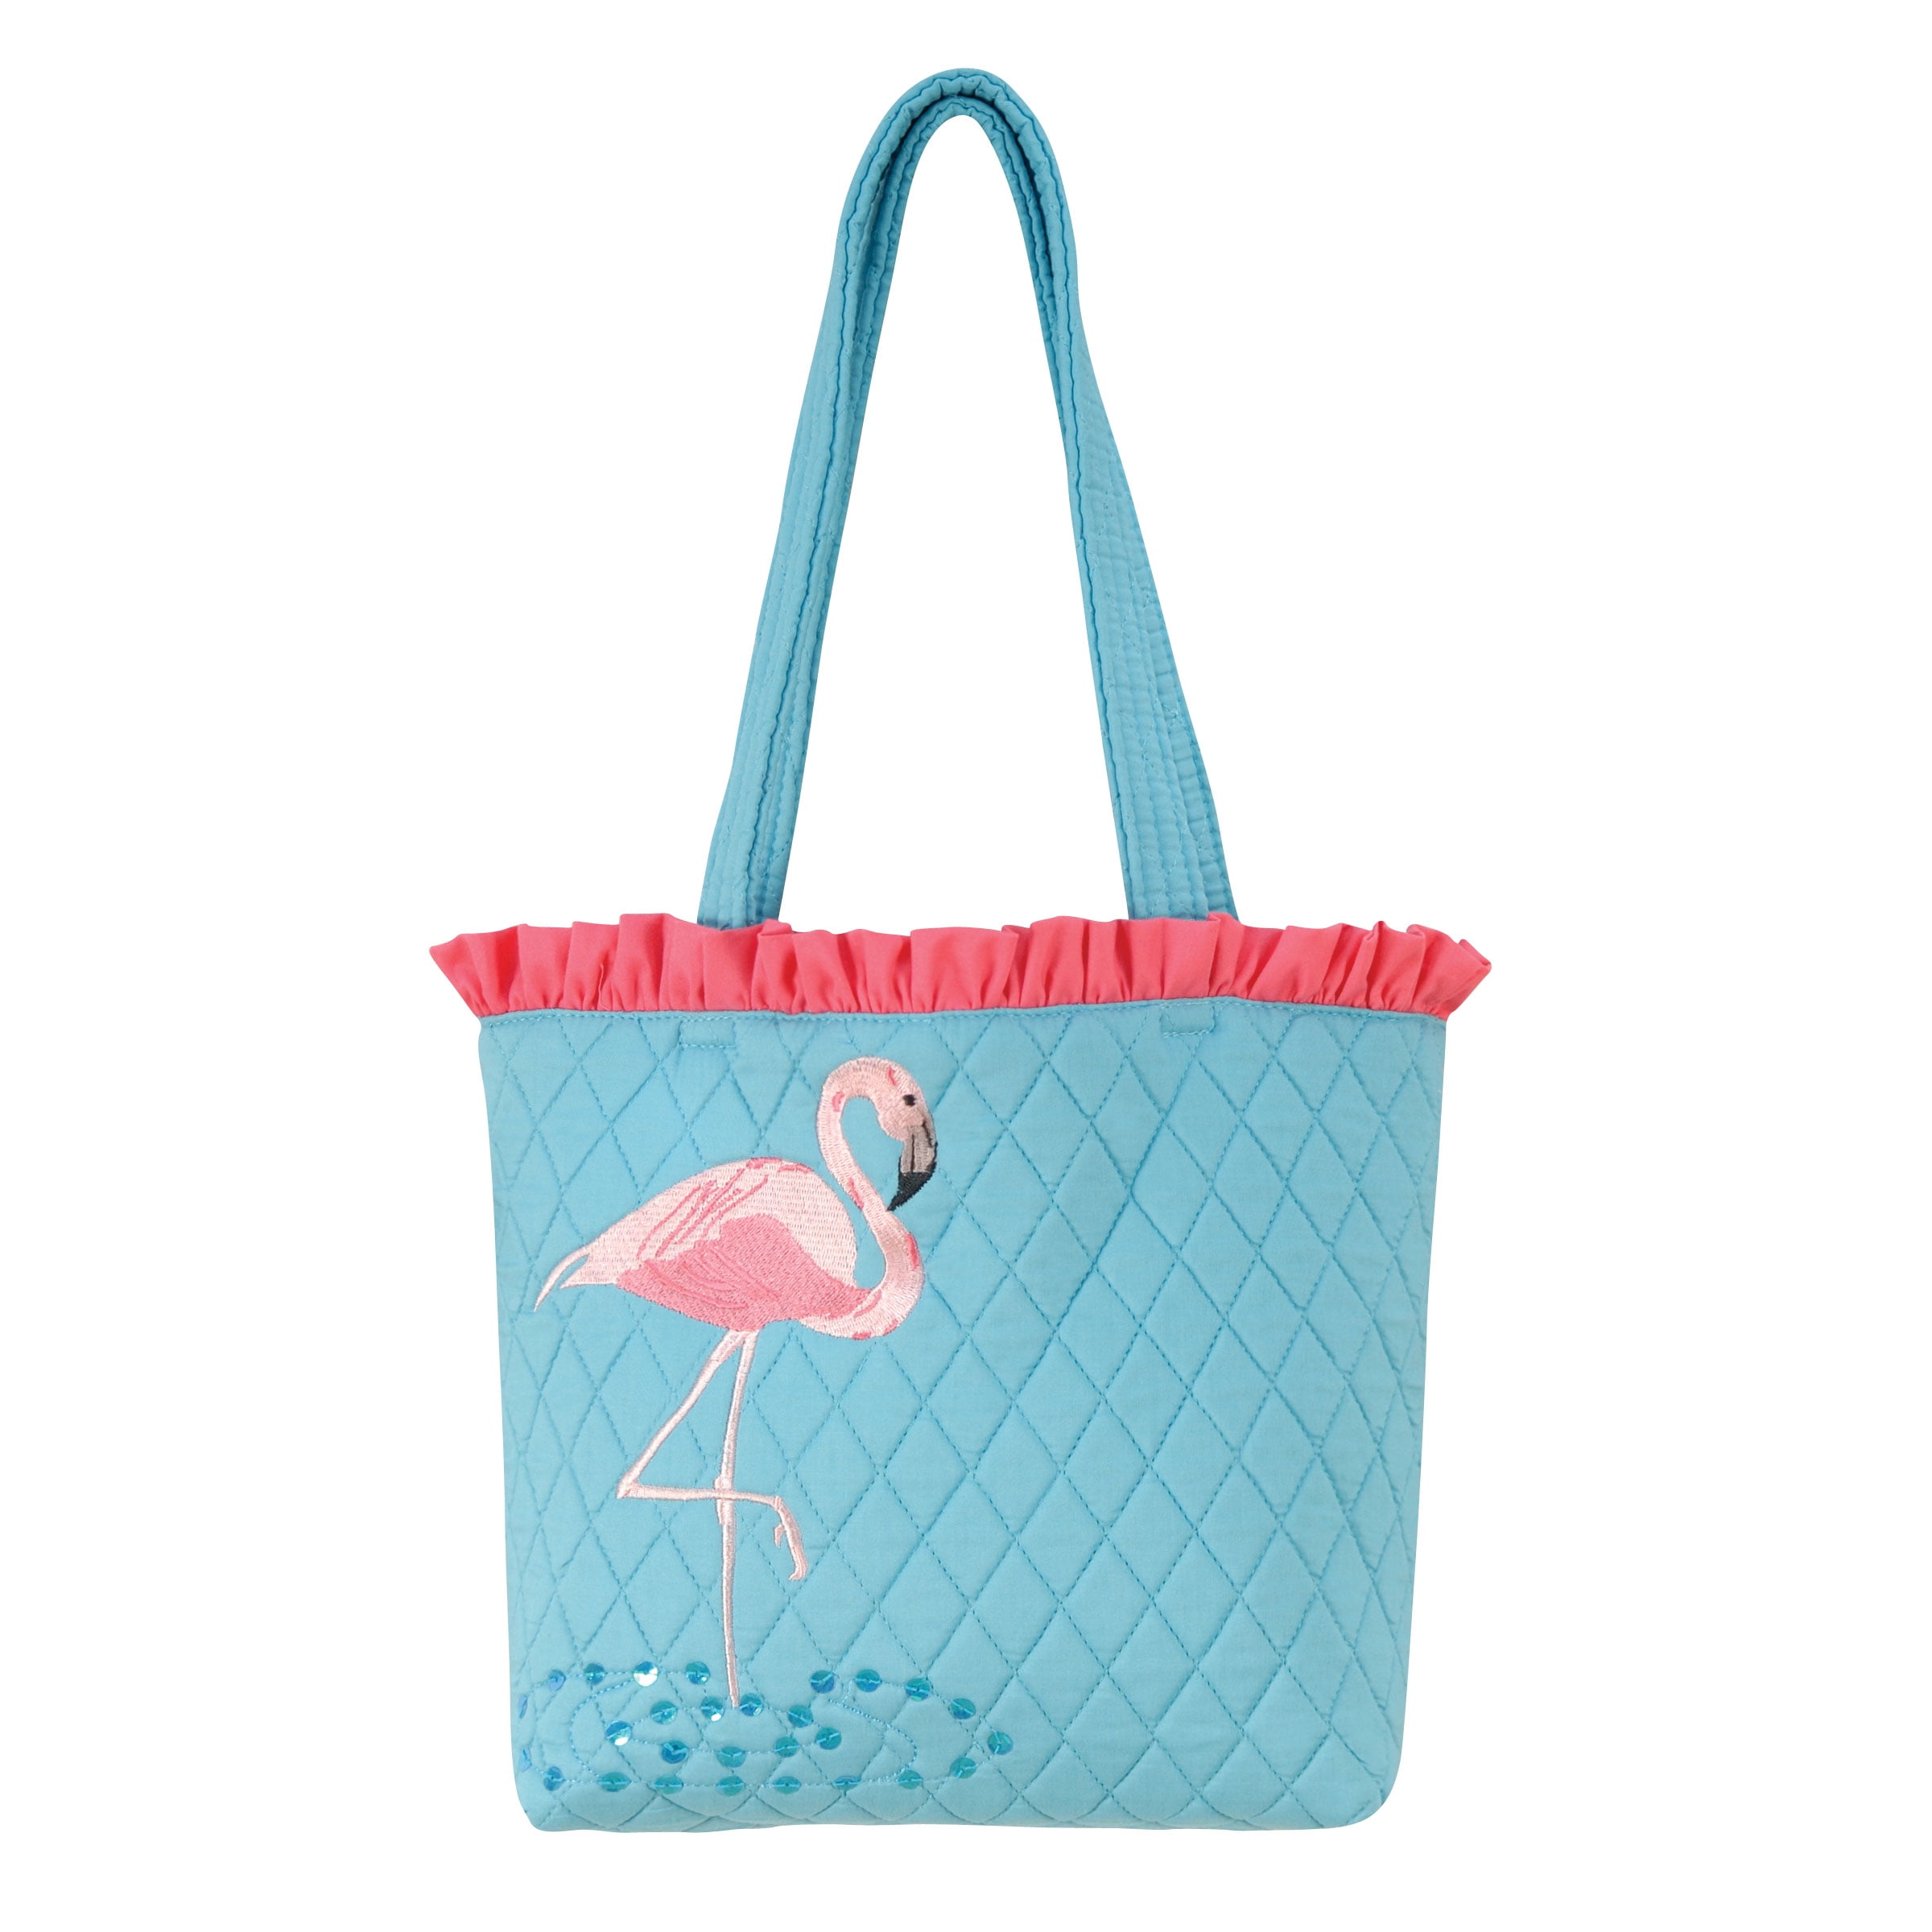 CEcKT Mermaid Insulated Lunch Tote Bag School Girls Tranquil Teal FREE SHIPPING 